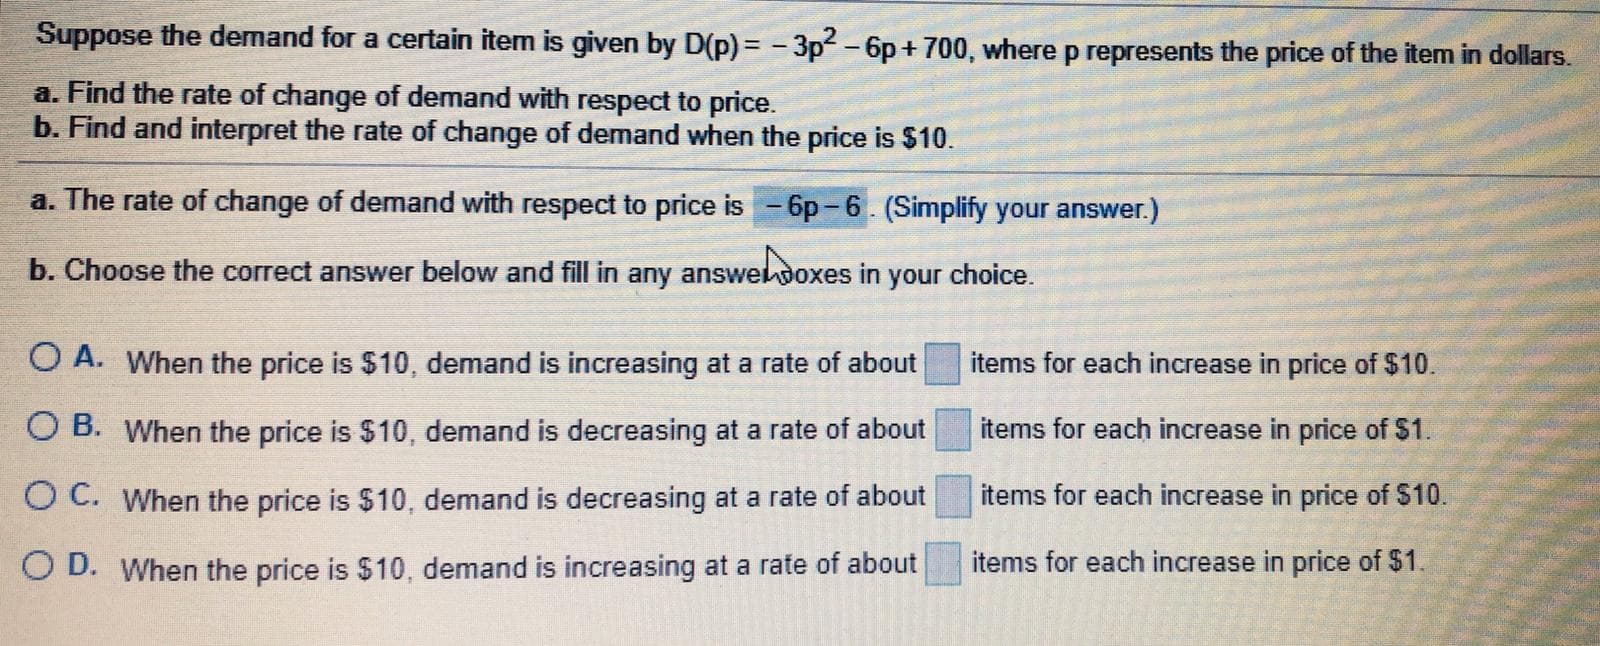 Suppose the demand for a certain item is given by D(p) = - 3p - 6p + 700, where p represents the price of the item in dollars.
a. Find the rate of change of demand with respect to price.
b. Find and interpret the rate of change of demand when the price is $10.
a. The rate of change of demand with respect to price is - 6p-6. (Simplify your answer.)
b. Choose the correct answer below and fill in any answedoxes in your choice.
O A. When the price is $10, demand is increasing at a rate of about
items for each increase in price of $10.
items for each increase in price of $1.
O B. When the price is $10, demand is decreasing at a rate of about
O C. When the price is $10, demand is decreasing at a rate of about
items for each increase in price of $10.
items for each increase in price of $1.
O D. When the price is $10, demand is increasing at a rate of about
